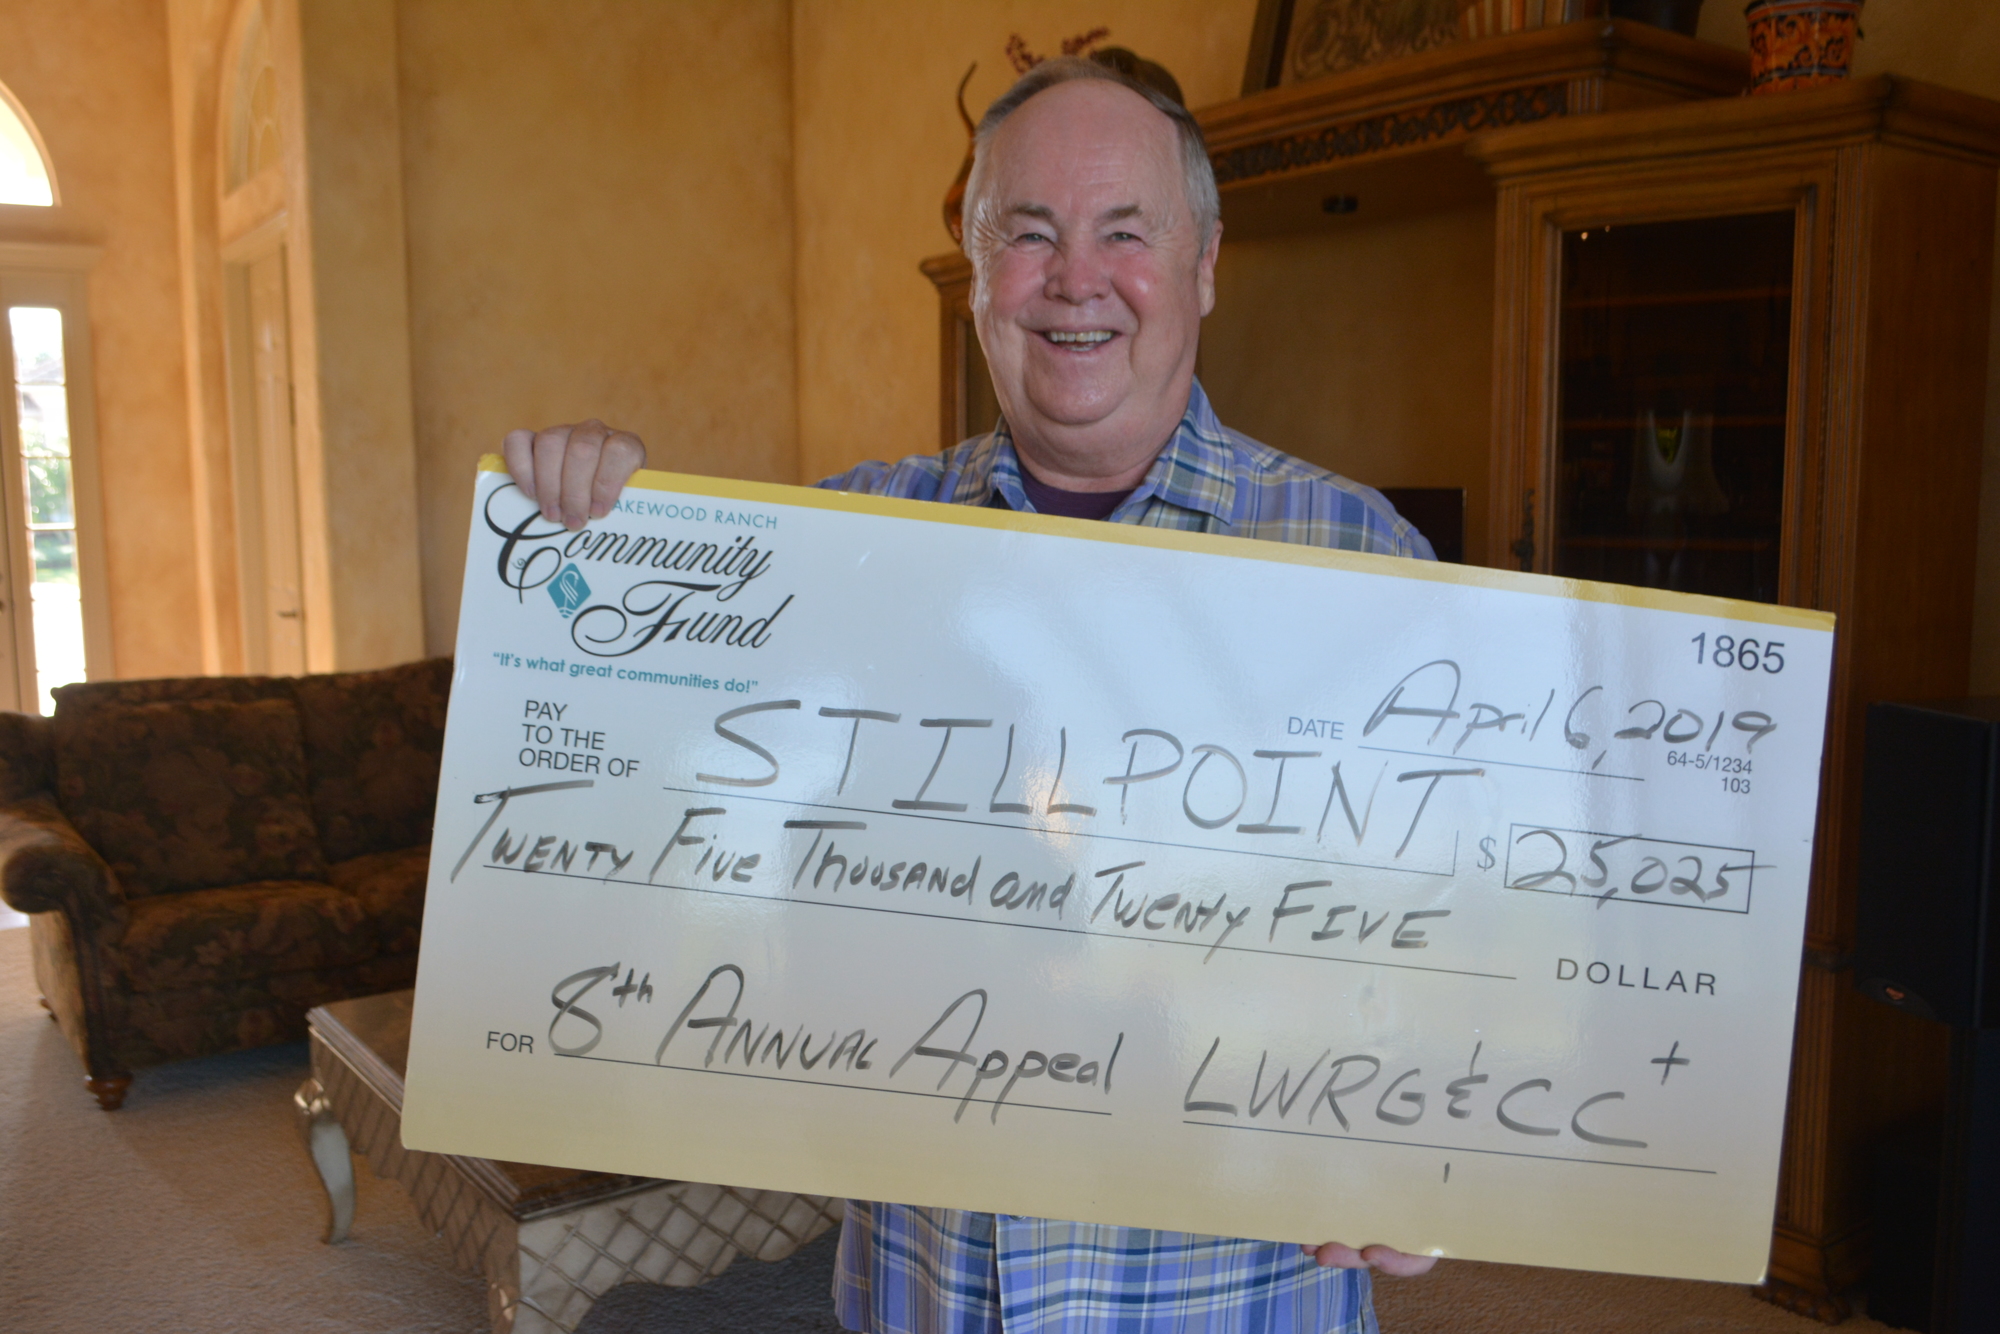 Lakewood Ranch's Bob Smith spearheaded a fundraising drive that raised $25,025 for the Stillpoint House of Prayer.